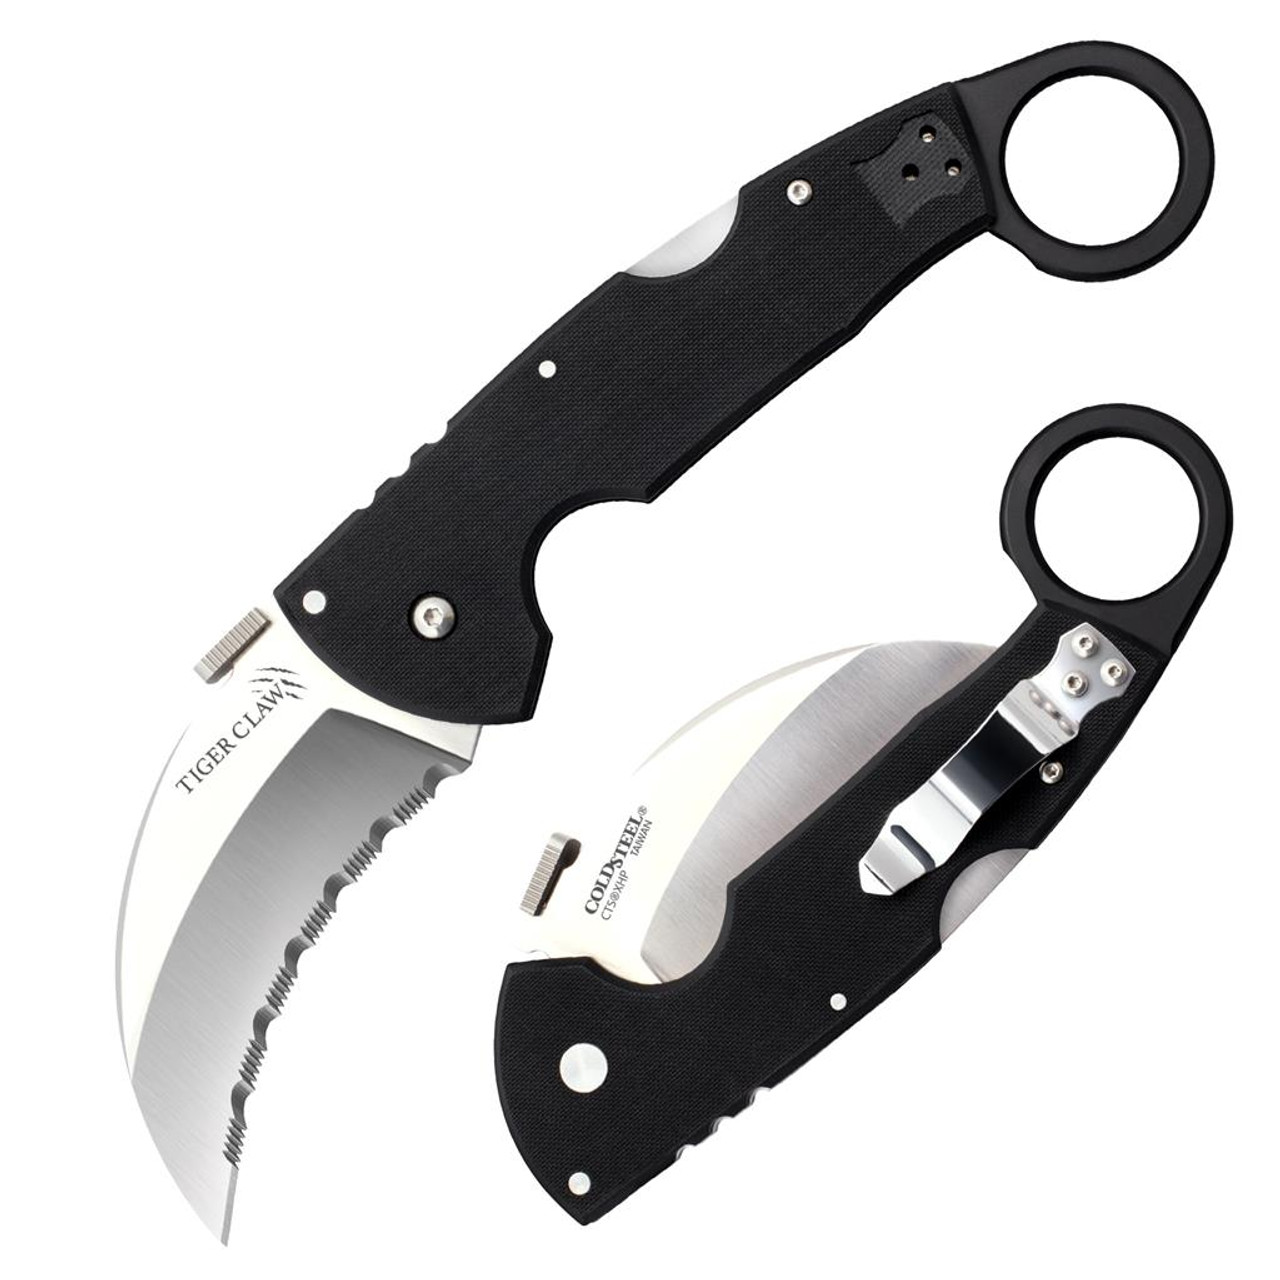 saber claw knives